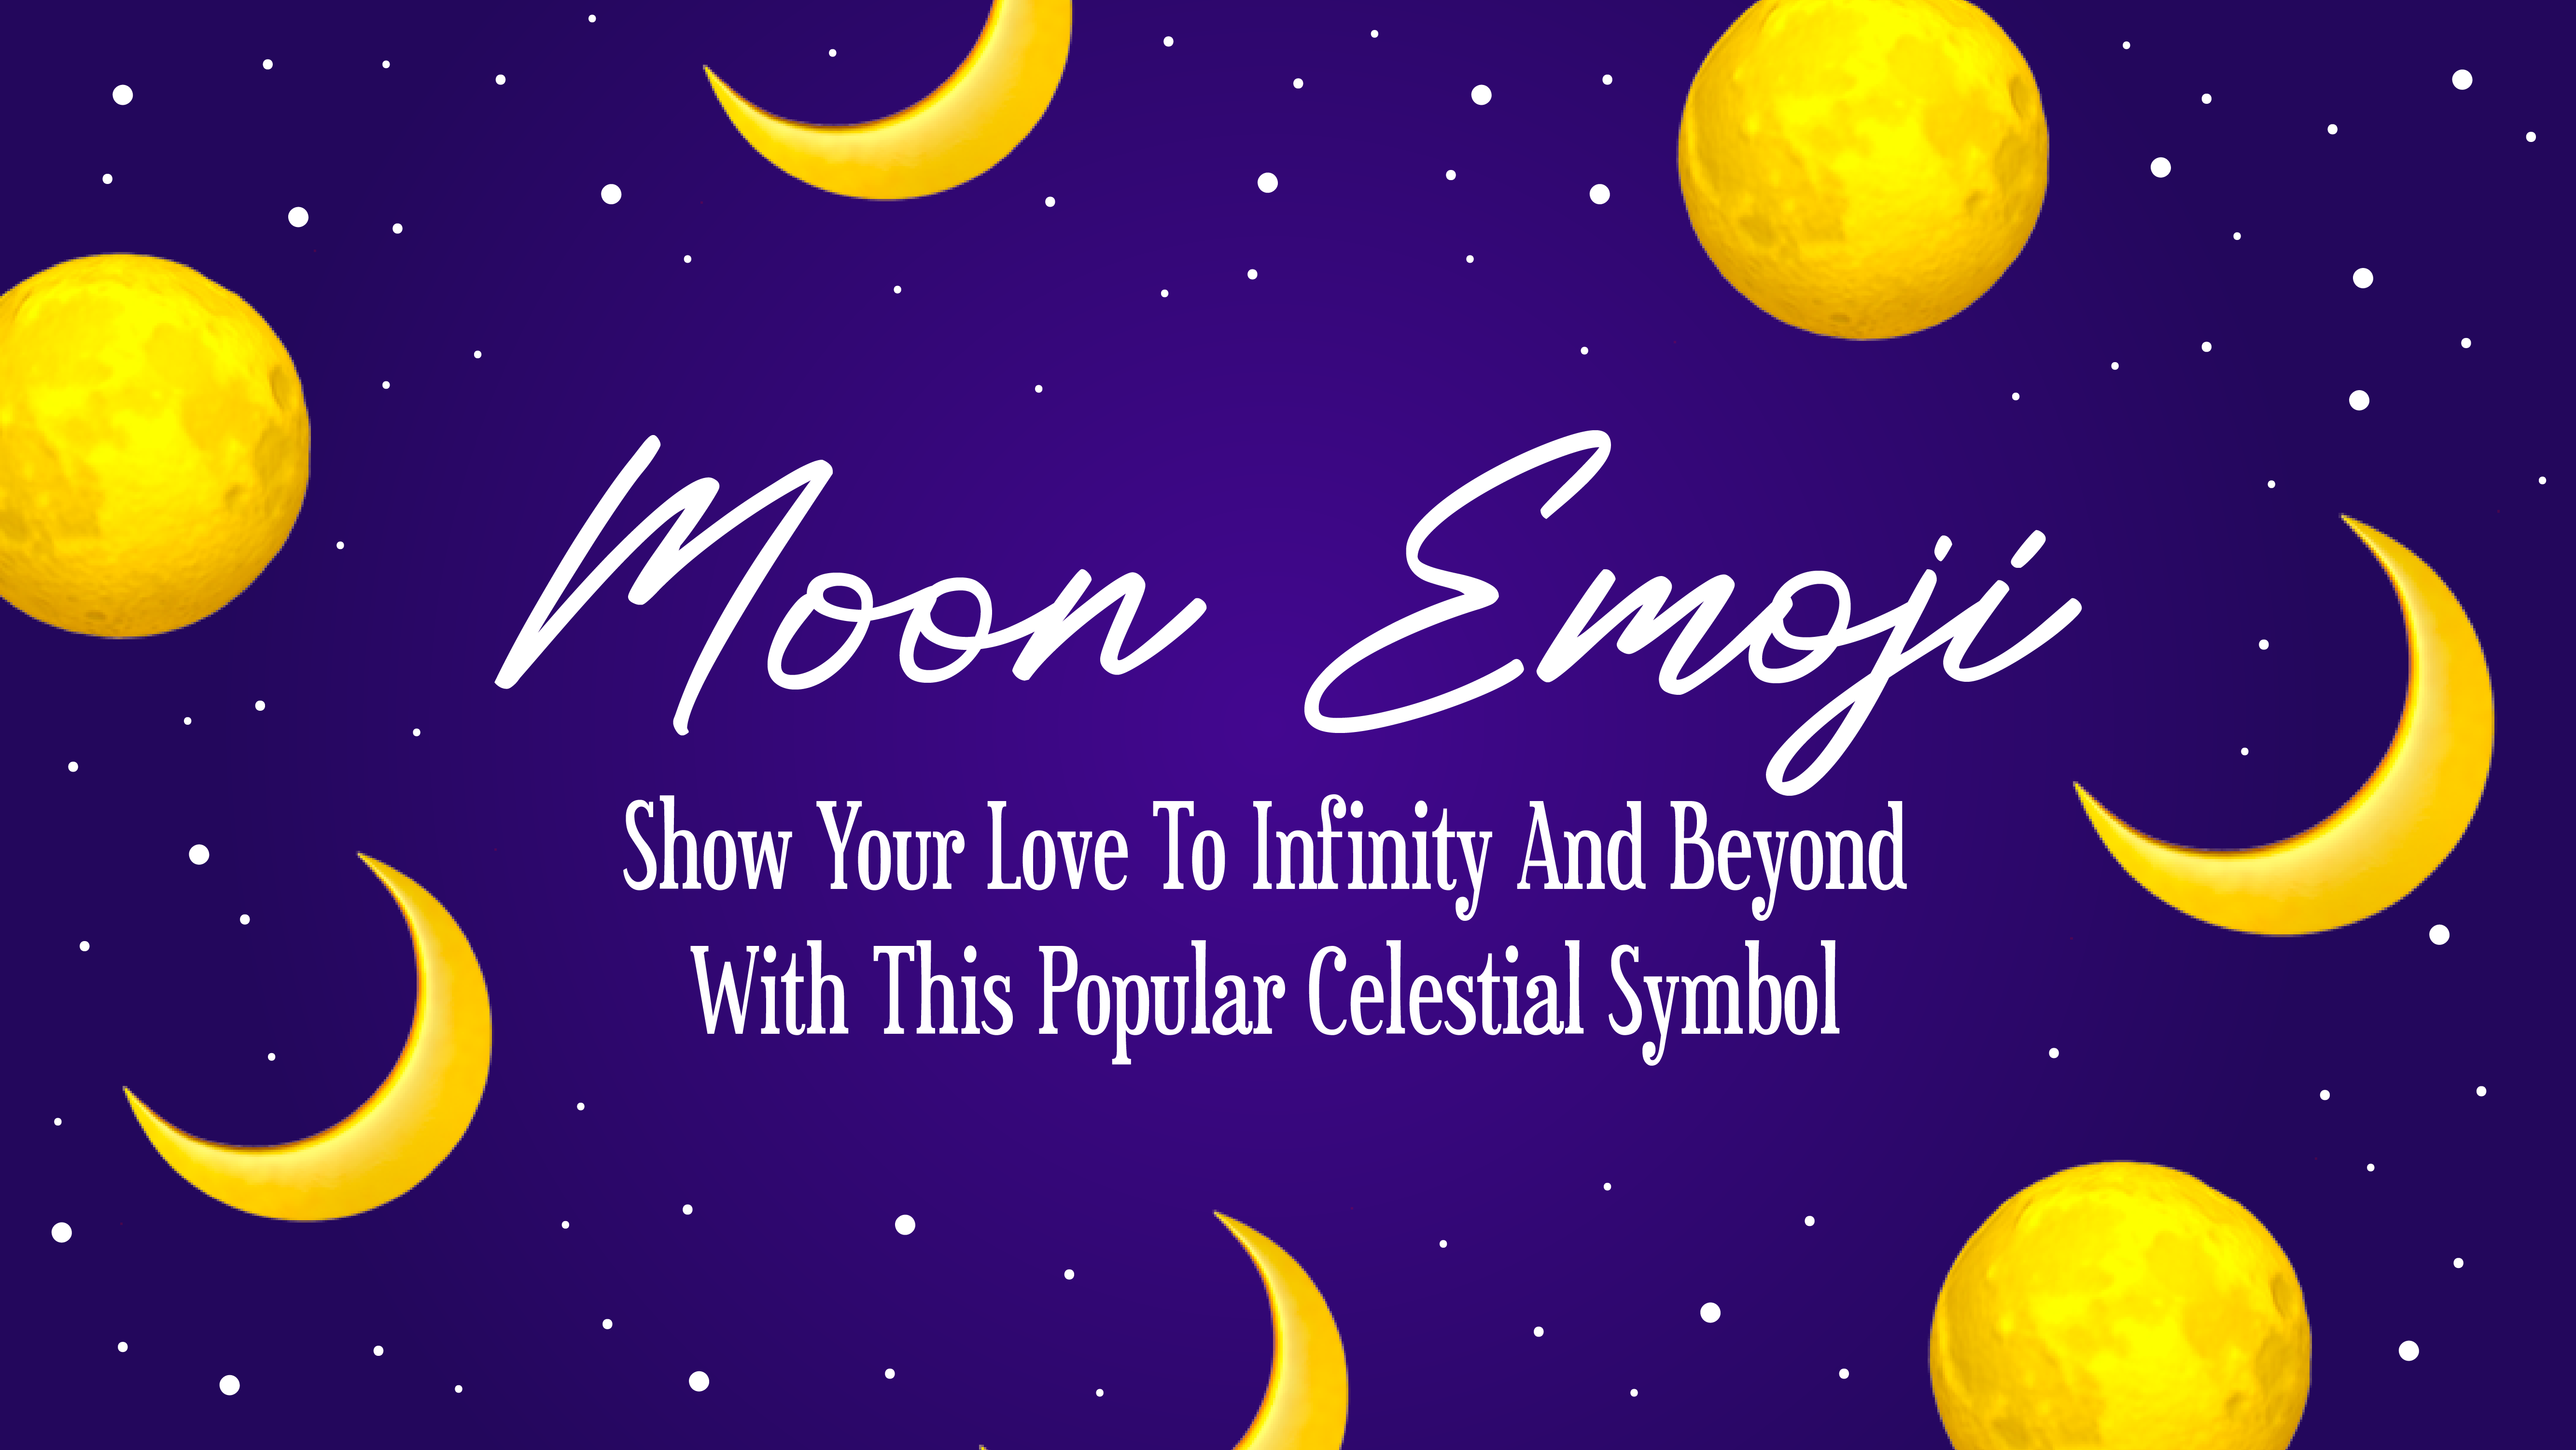 This Study Will Perfect Your Moon Reading: Read Or Miss Out